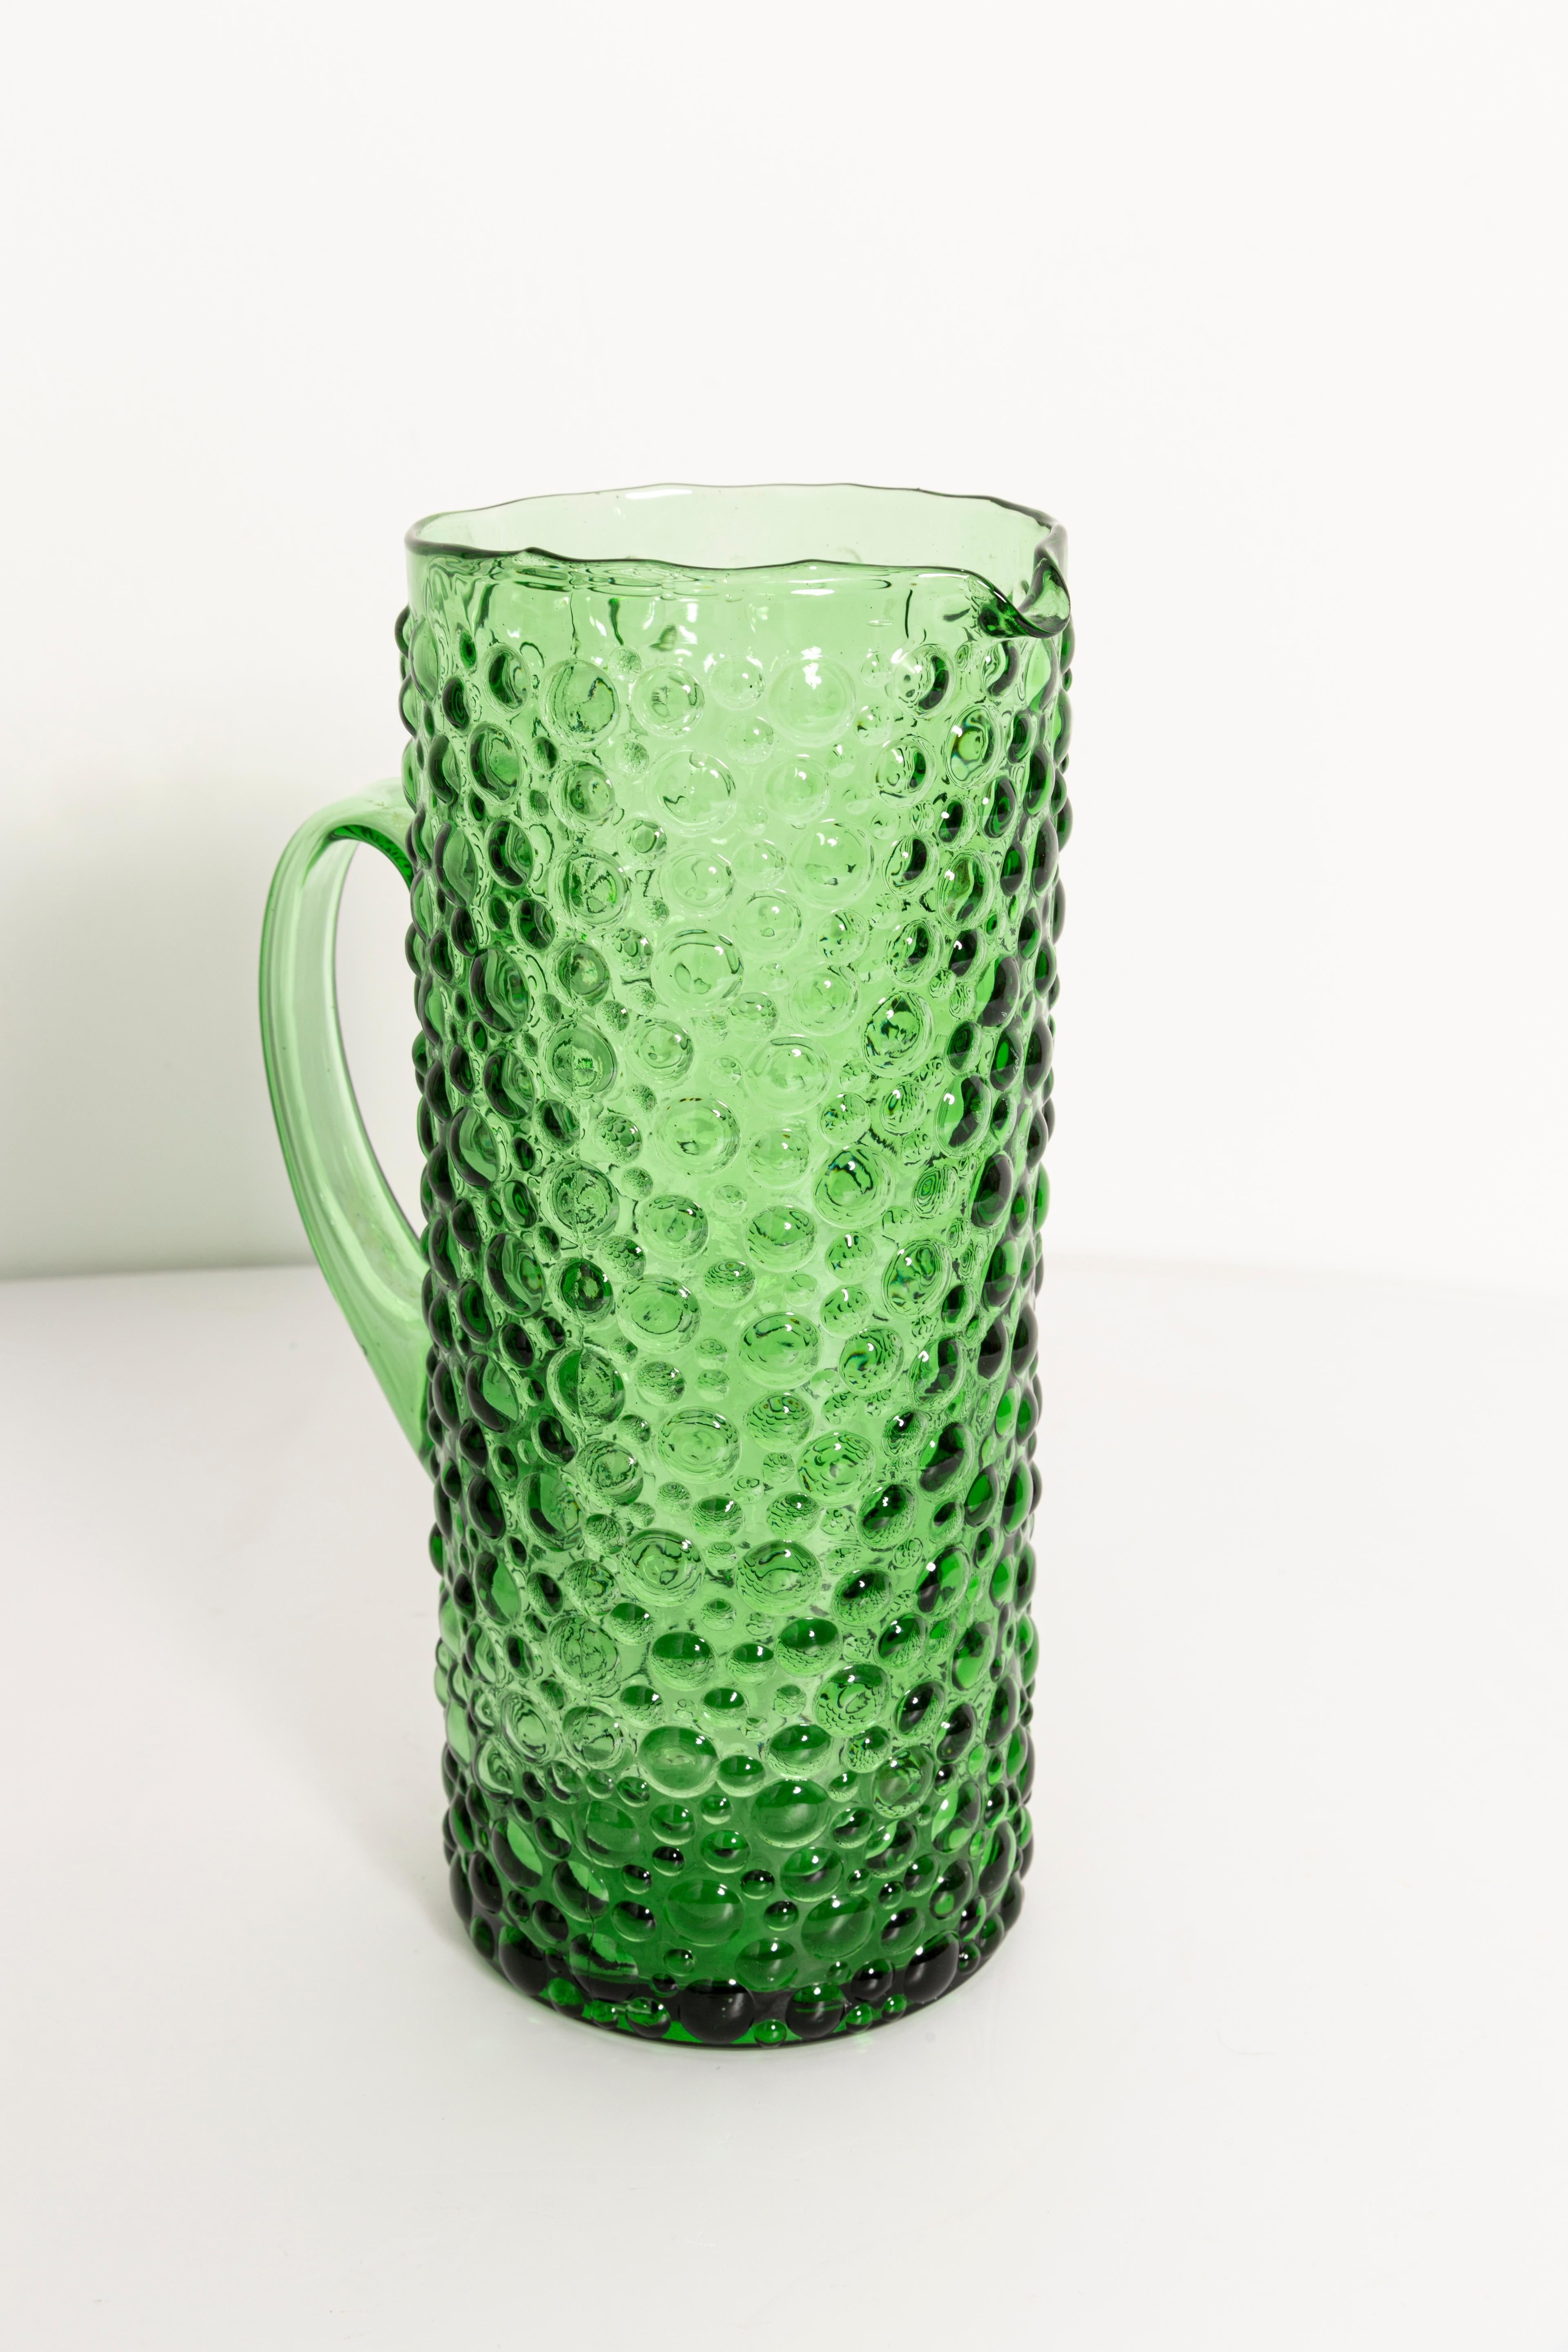 A stunning dark green glass vase with geometric bubble design, made by one of the many glass manufacturers based in the region of Empoli, Italy. Would make a great addition to any collection! Excellent condition, no chips or cracks other than a